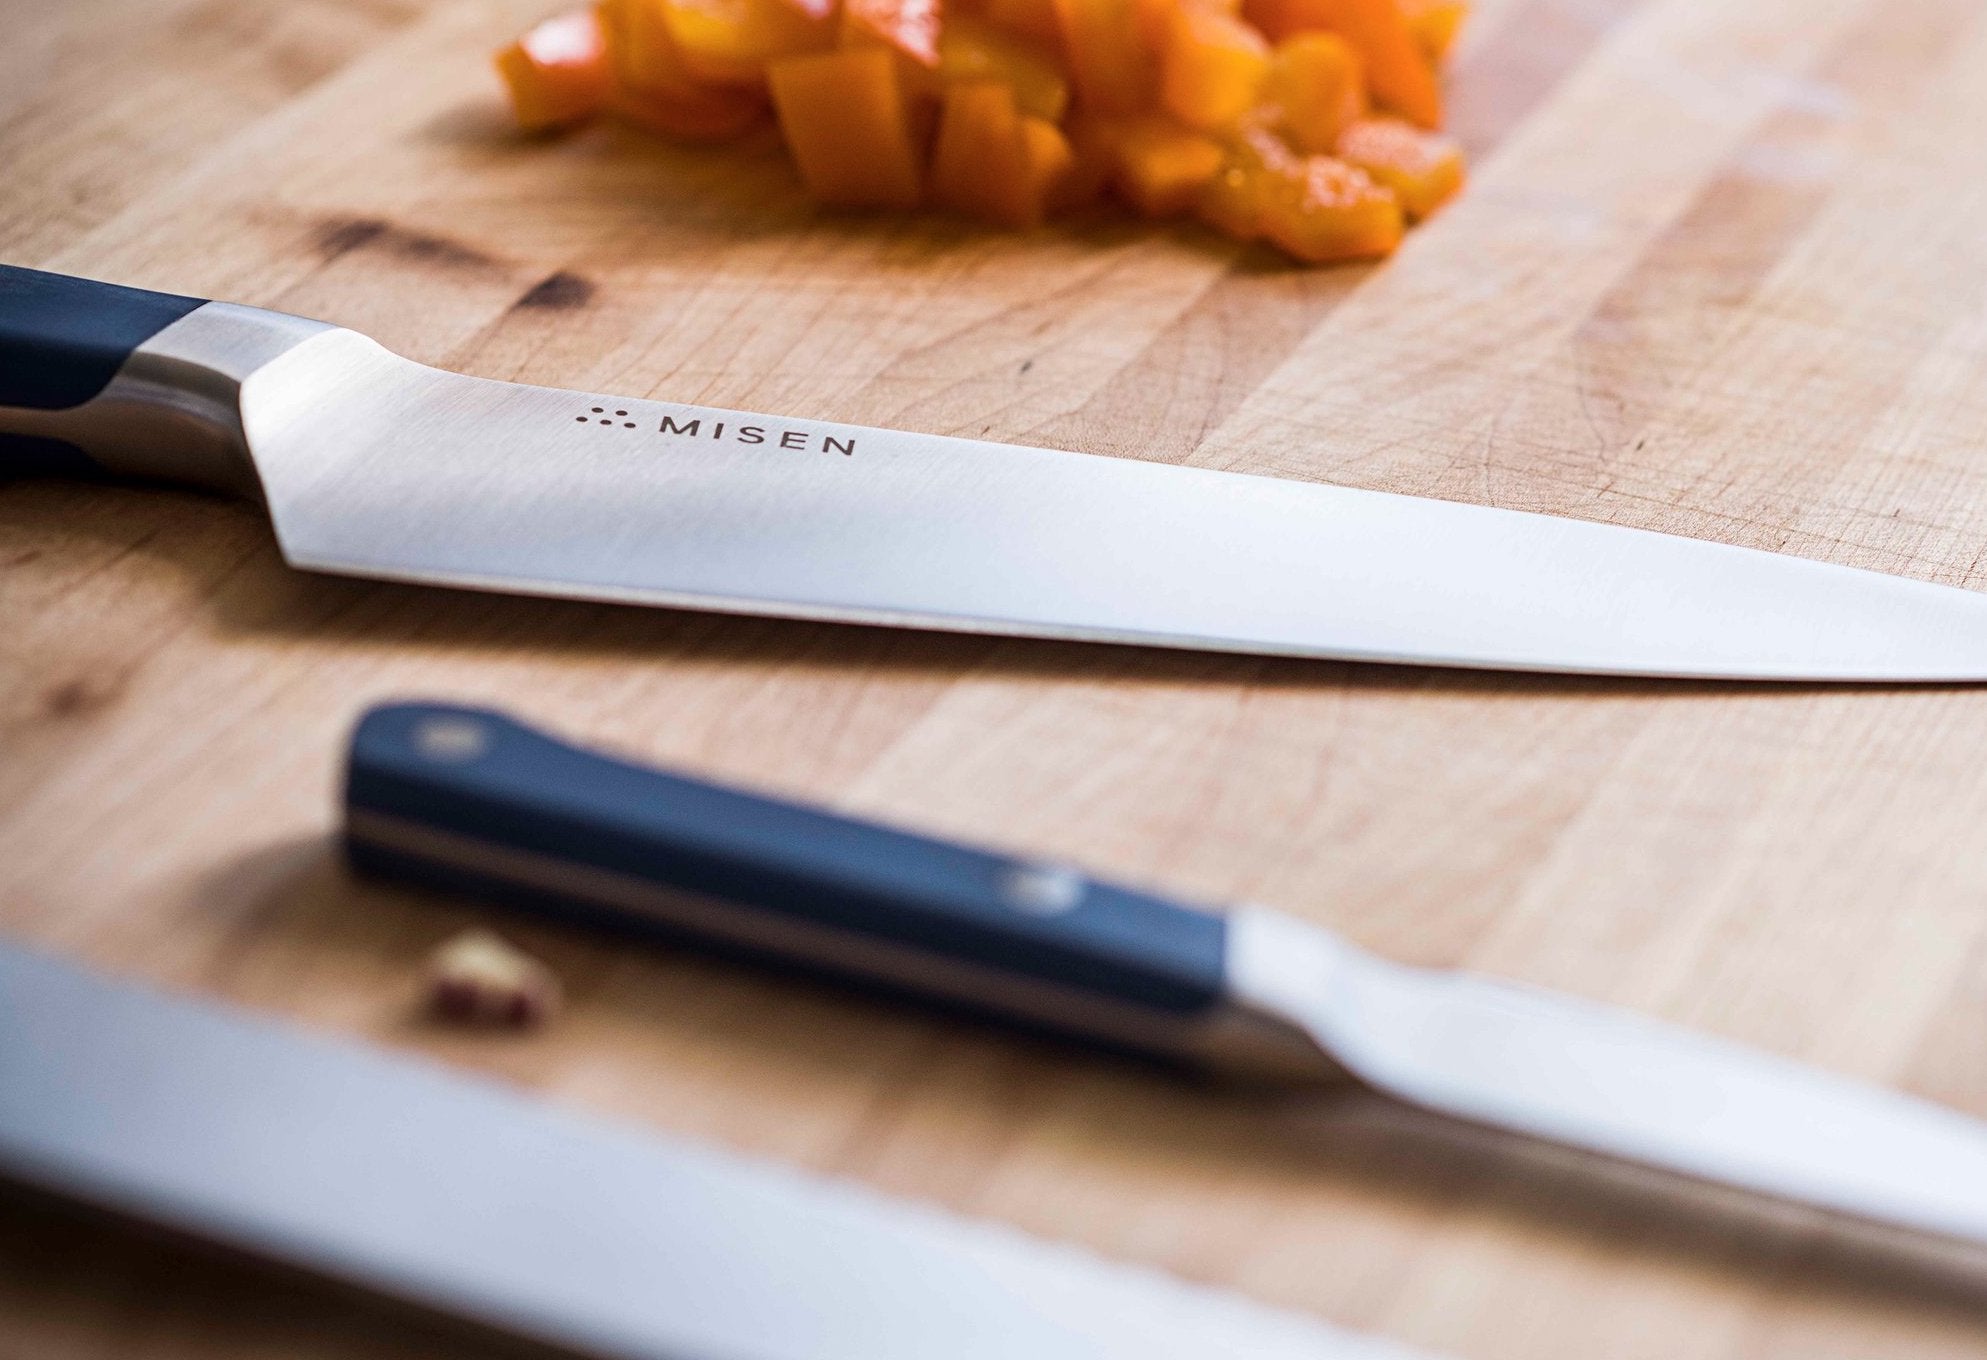 Santoku vs. chef's knife: three knives on a cutting board with diced carrots